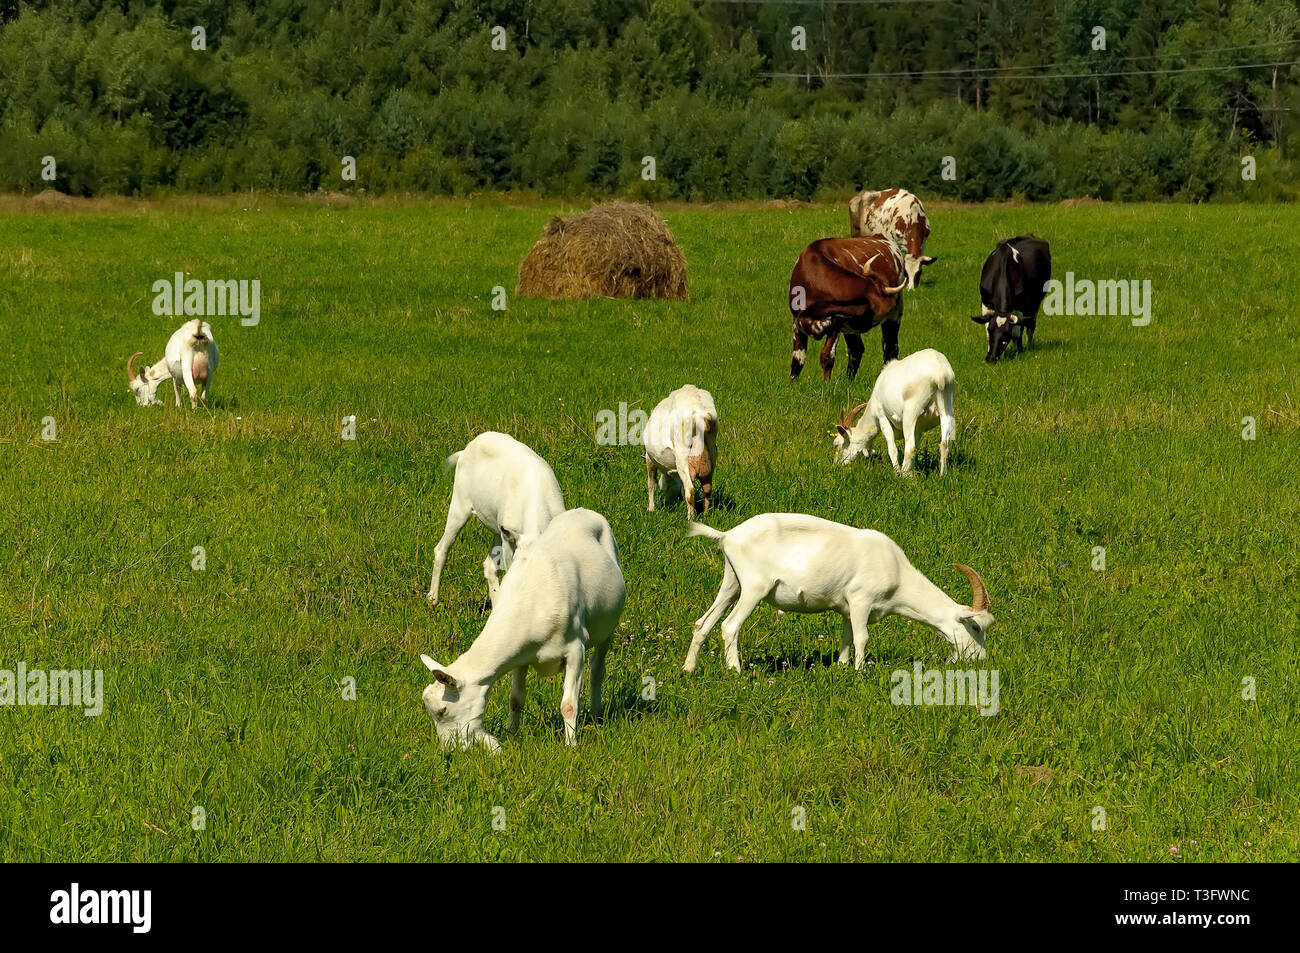 Summer countryside with grazing animals, cows and goats. Stock Photo